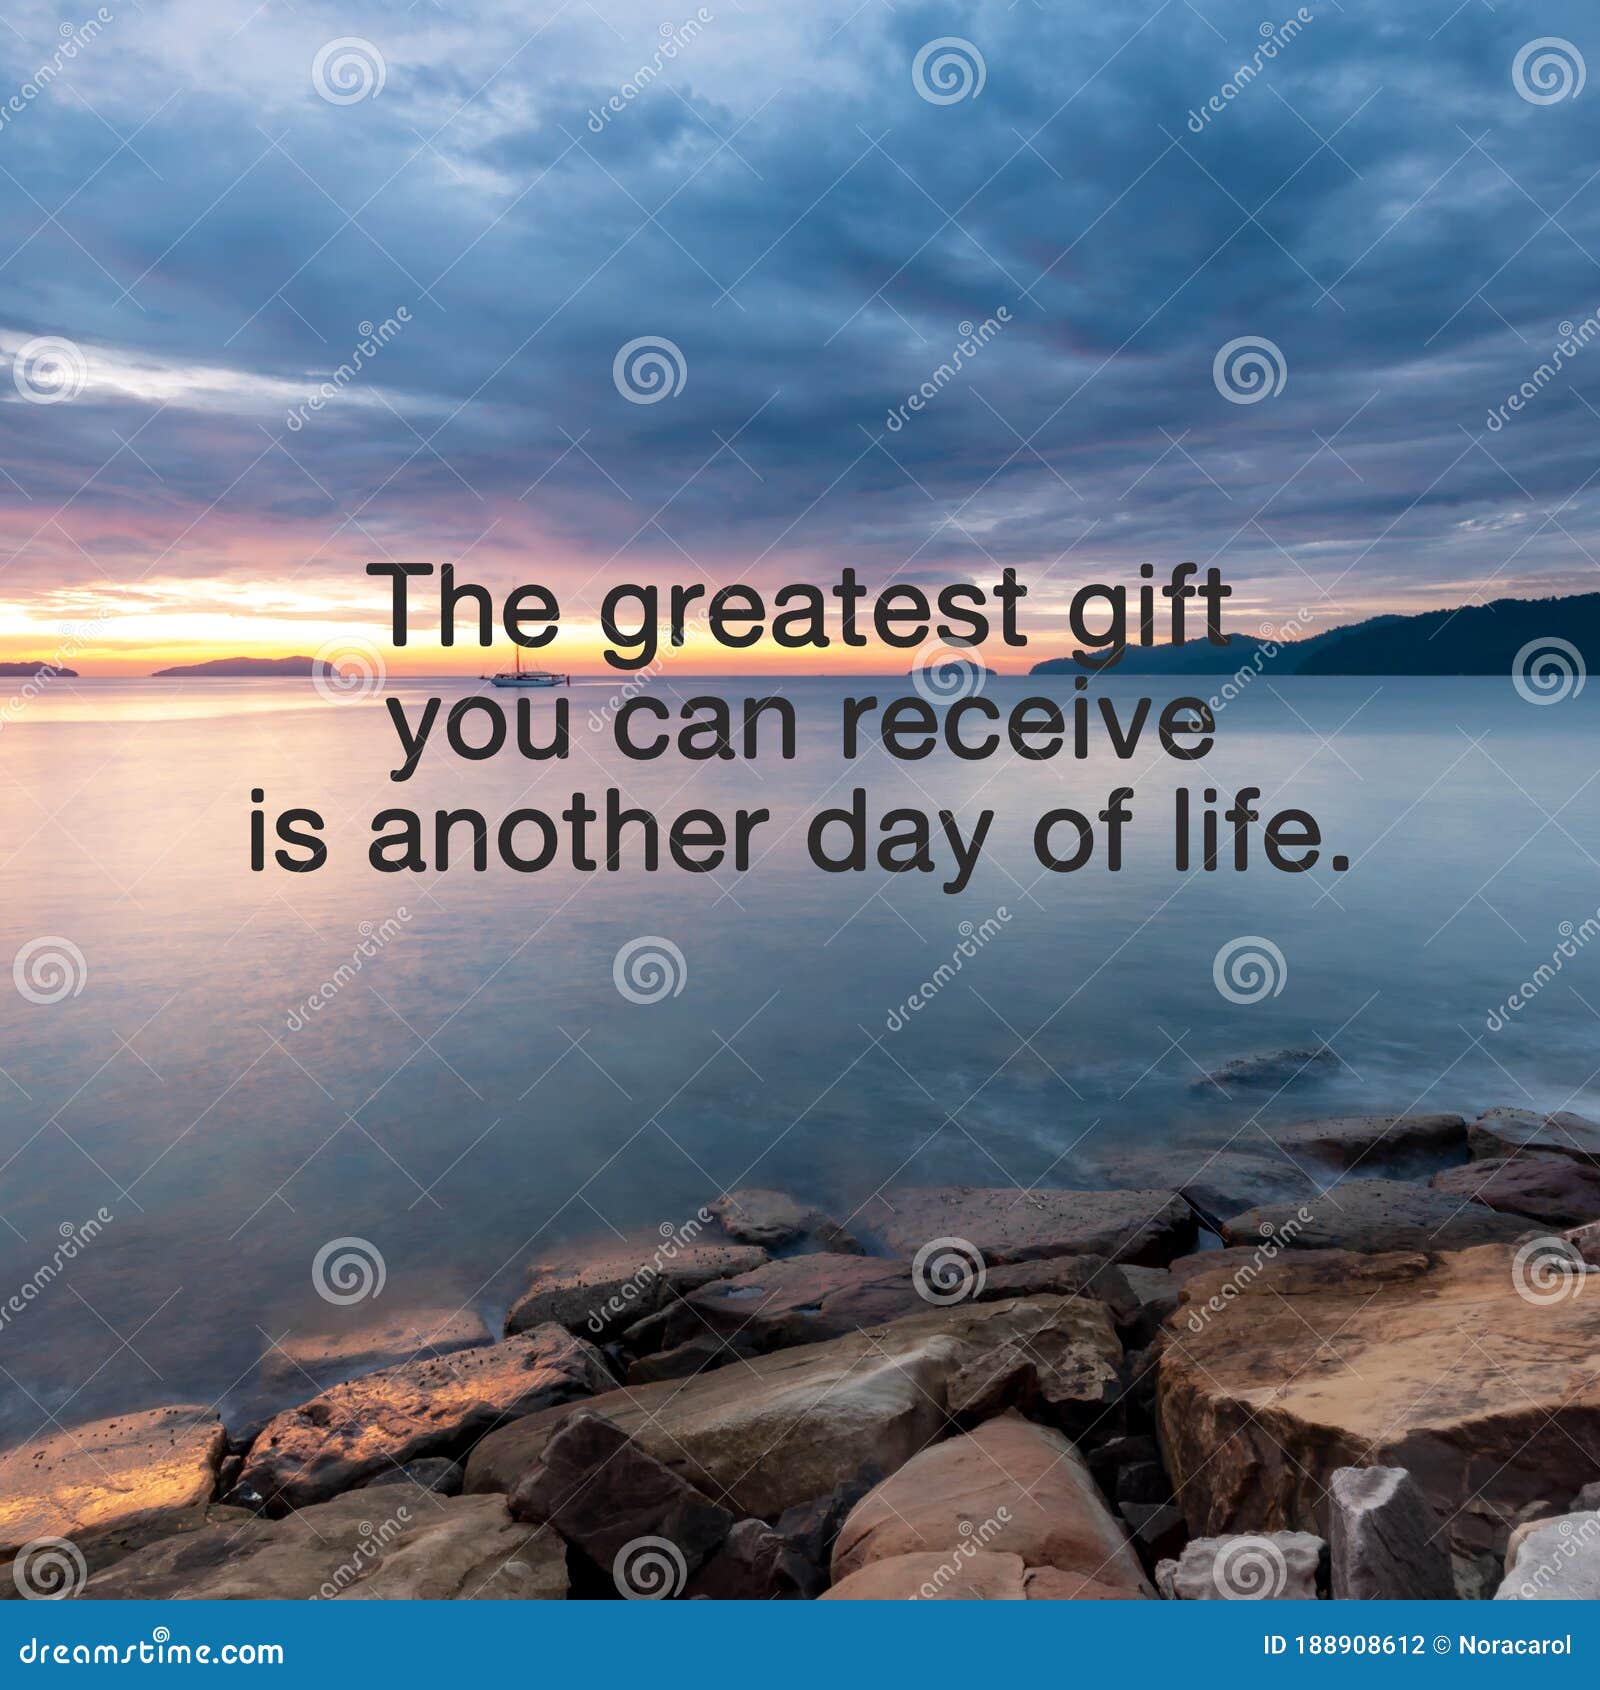 1,839 Greatest Gift Images, Stock Photos & Vectors | Shutterstock